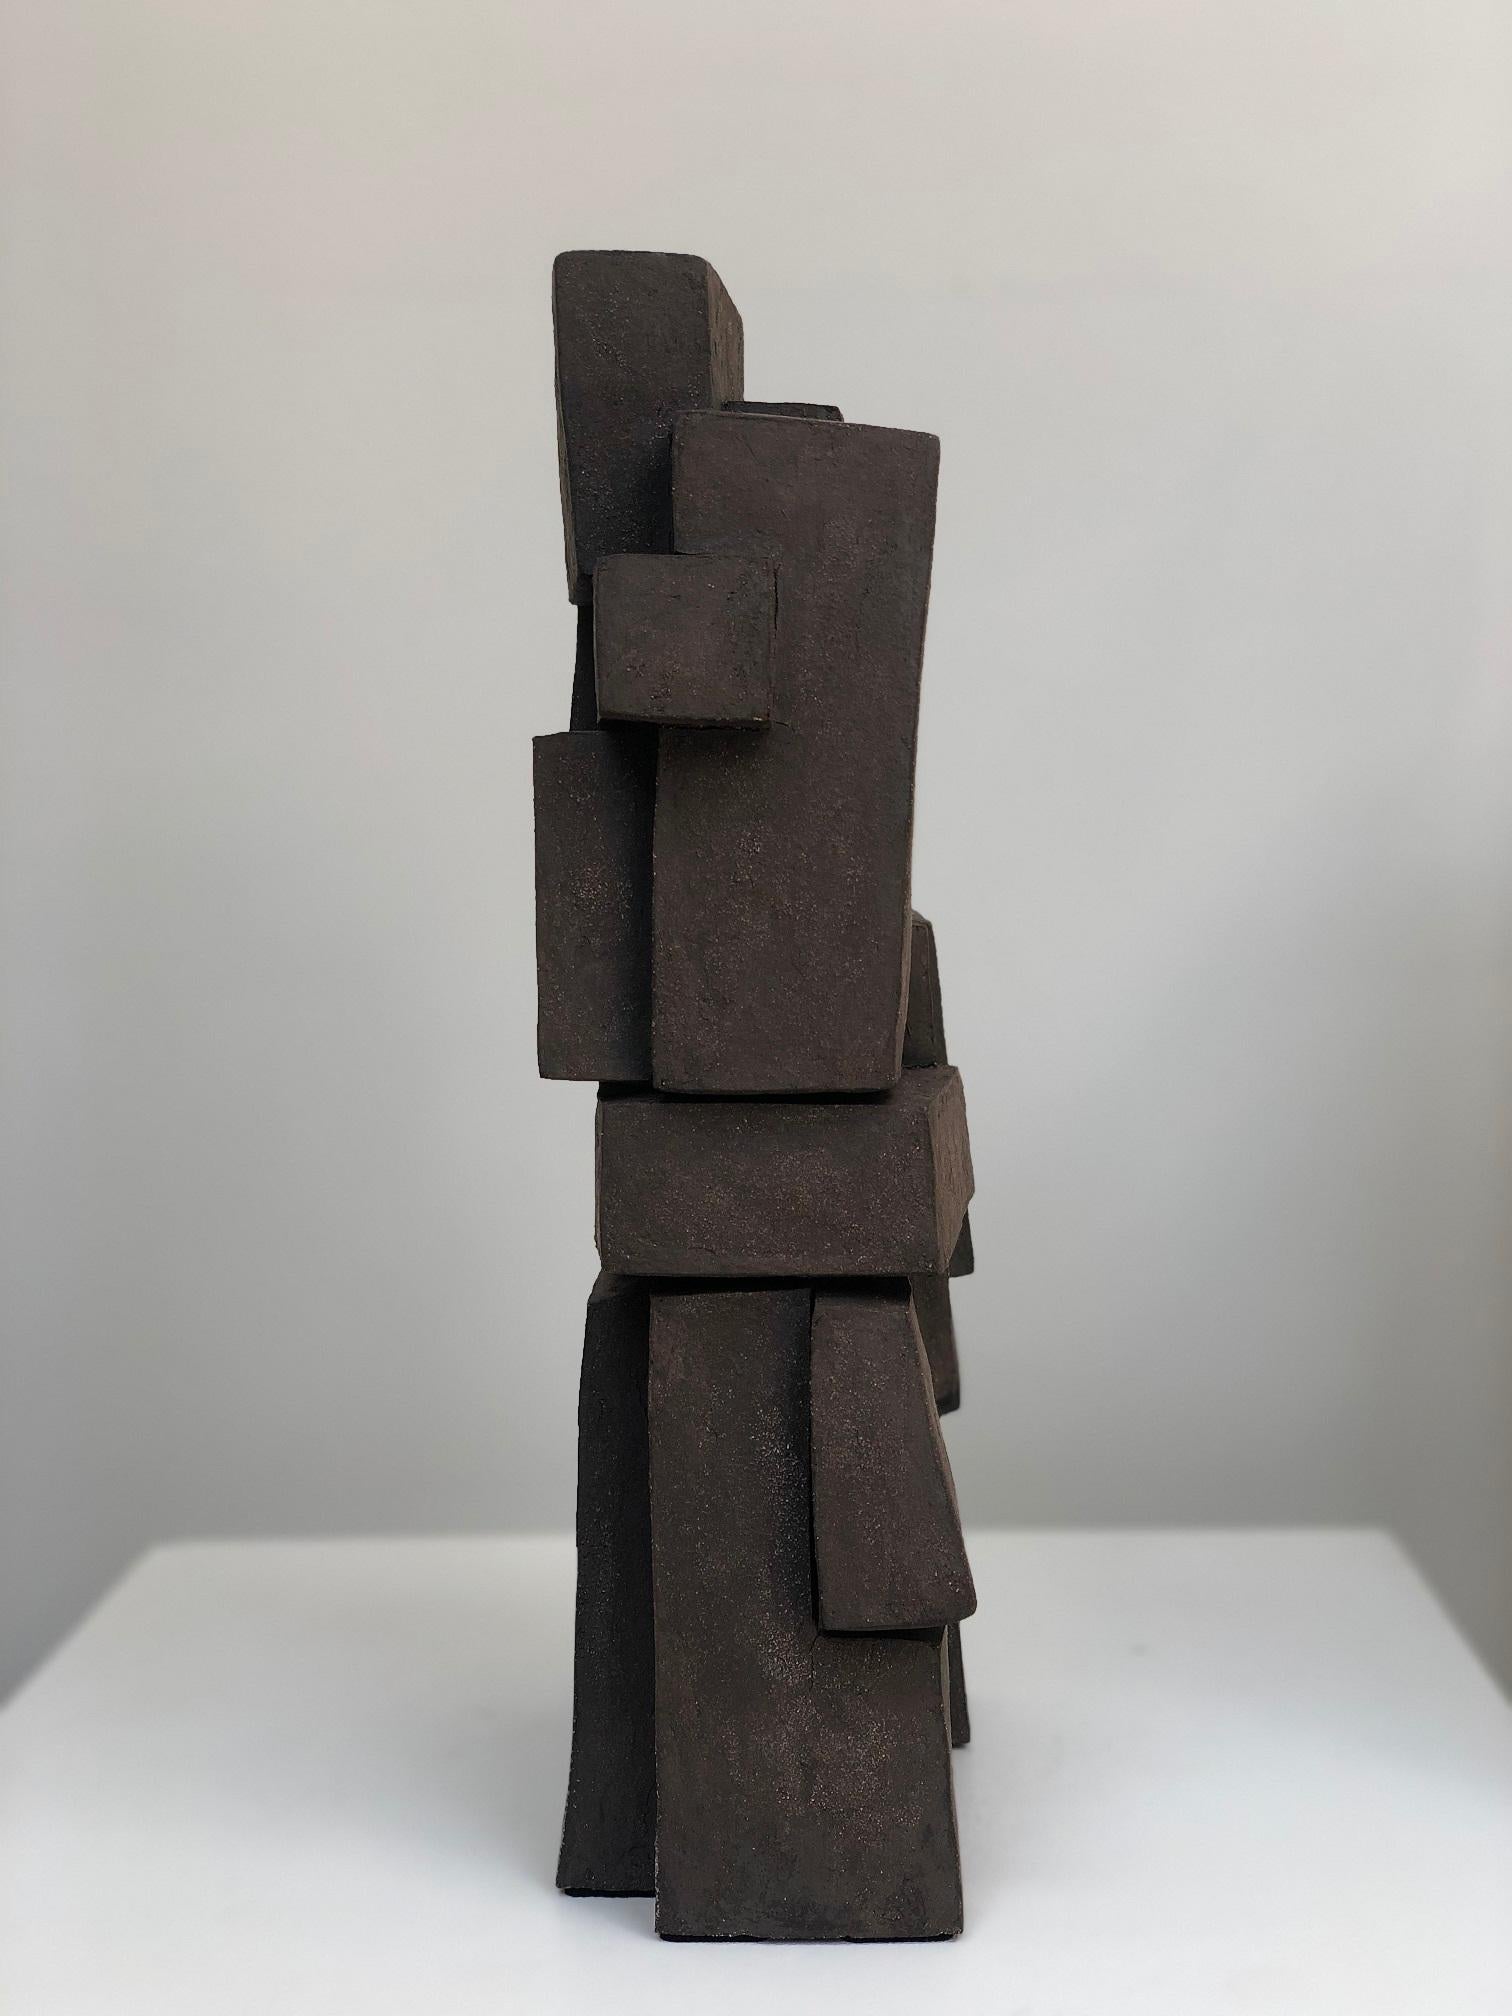 Unity I, Terracotta (Geometric Sculpture) - Gray Abstract Sculpture by Delphine Brabant